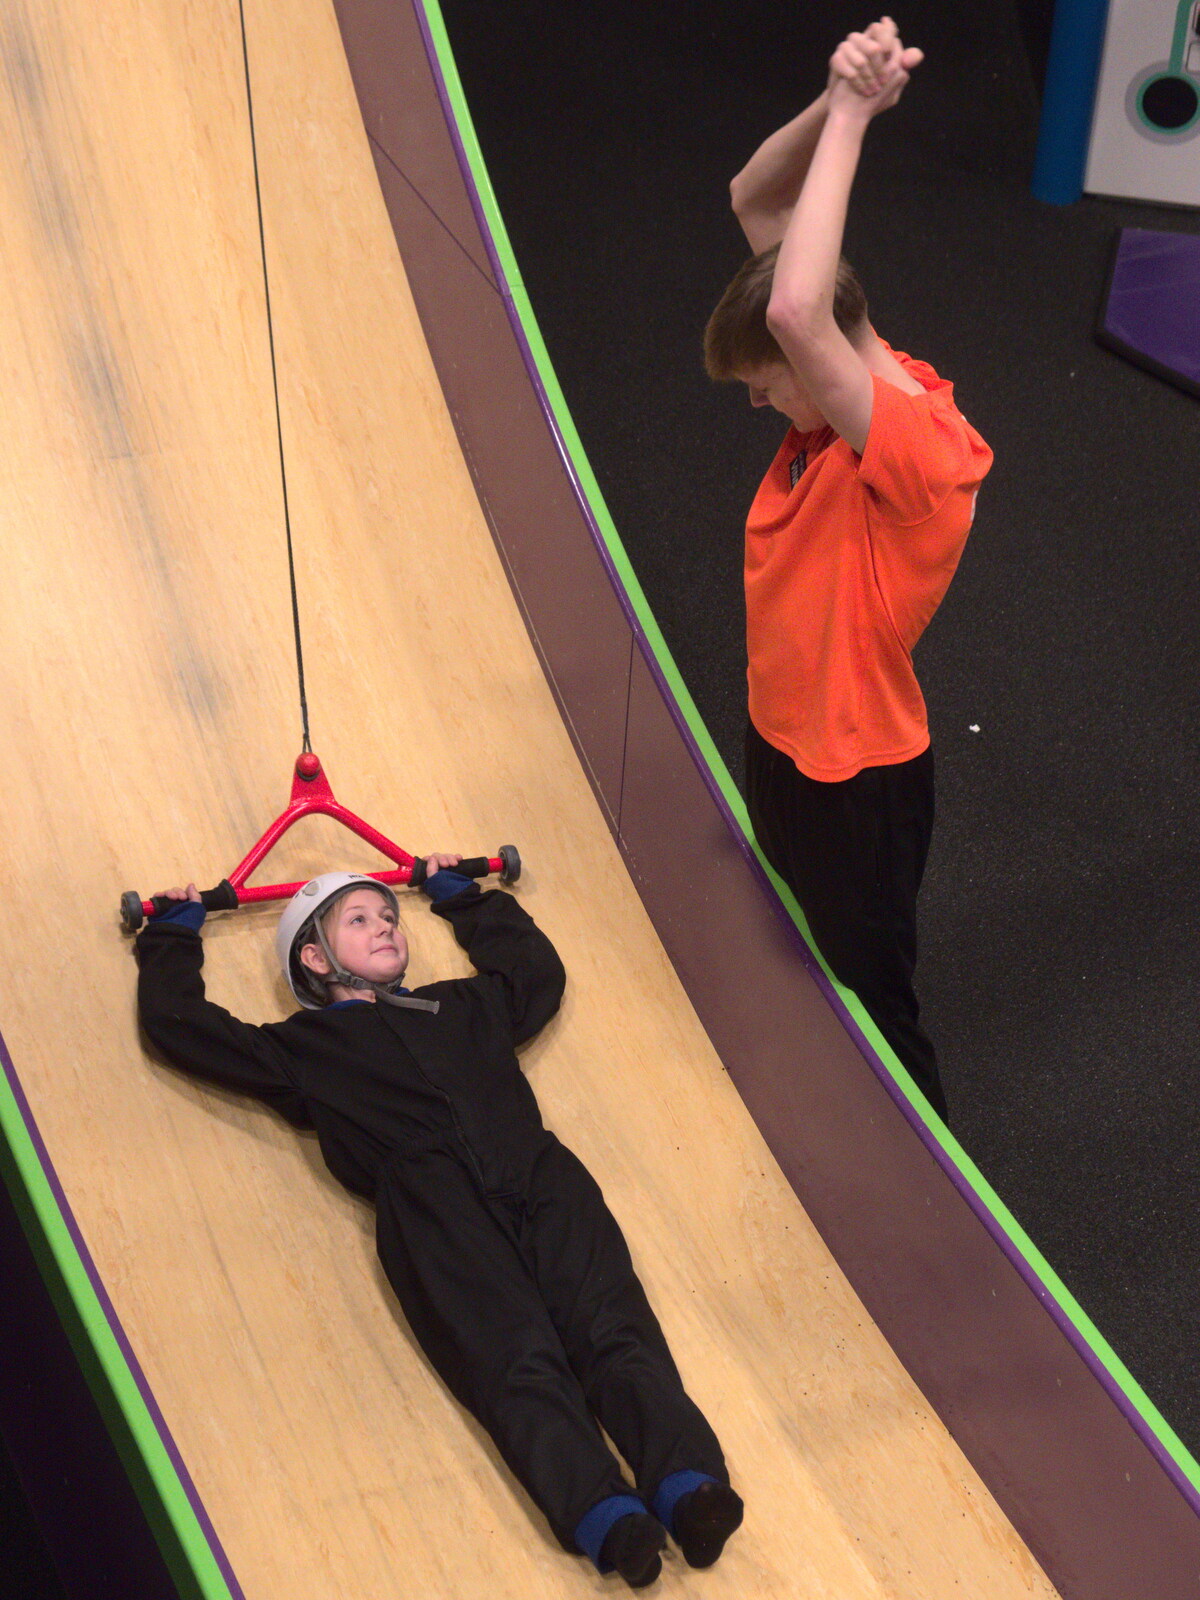 Soph goes up the slide from Clip and Climb, The Havens, Ipswich - 15th February 2020